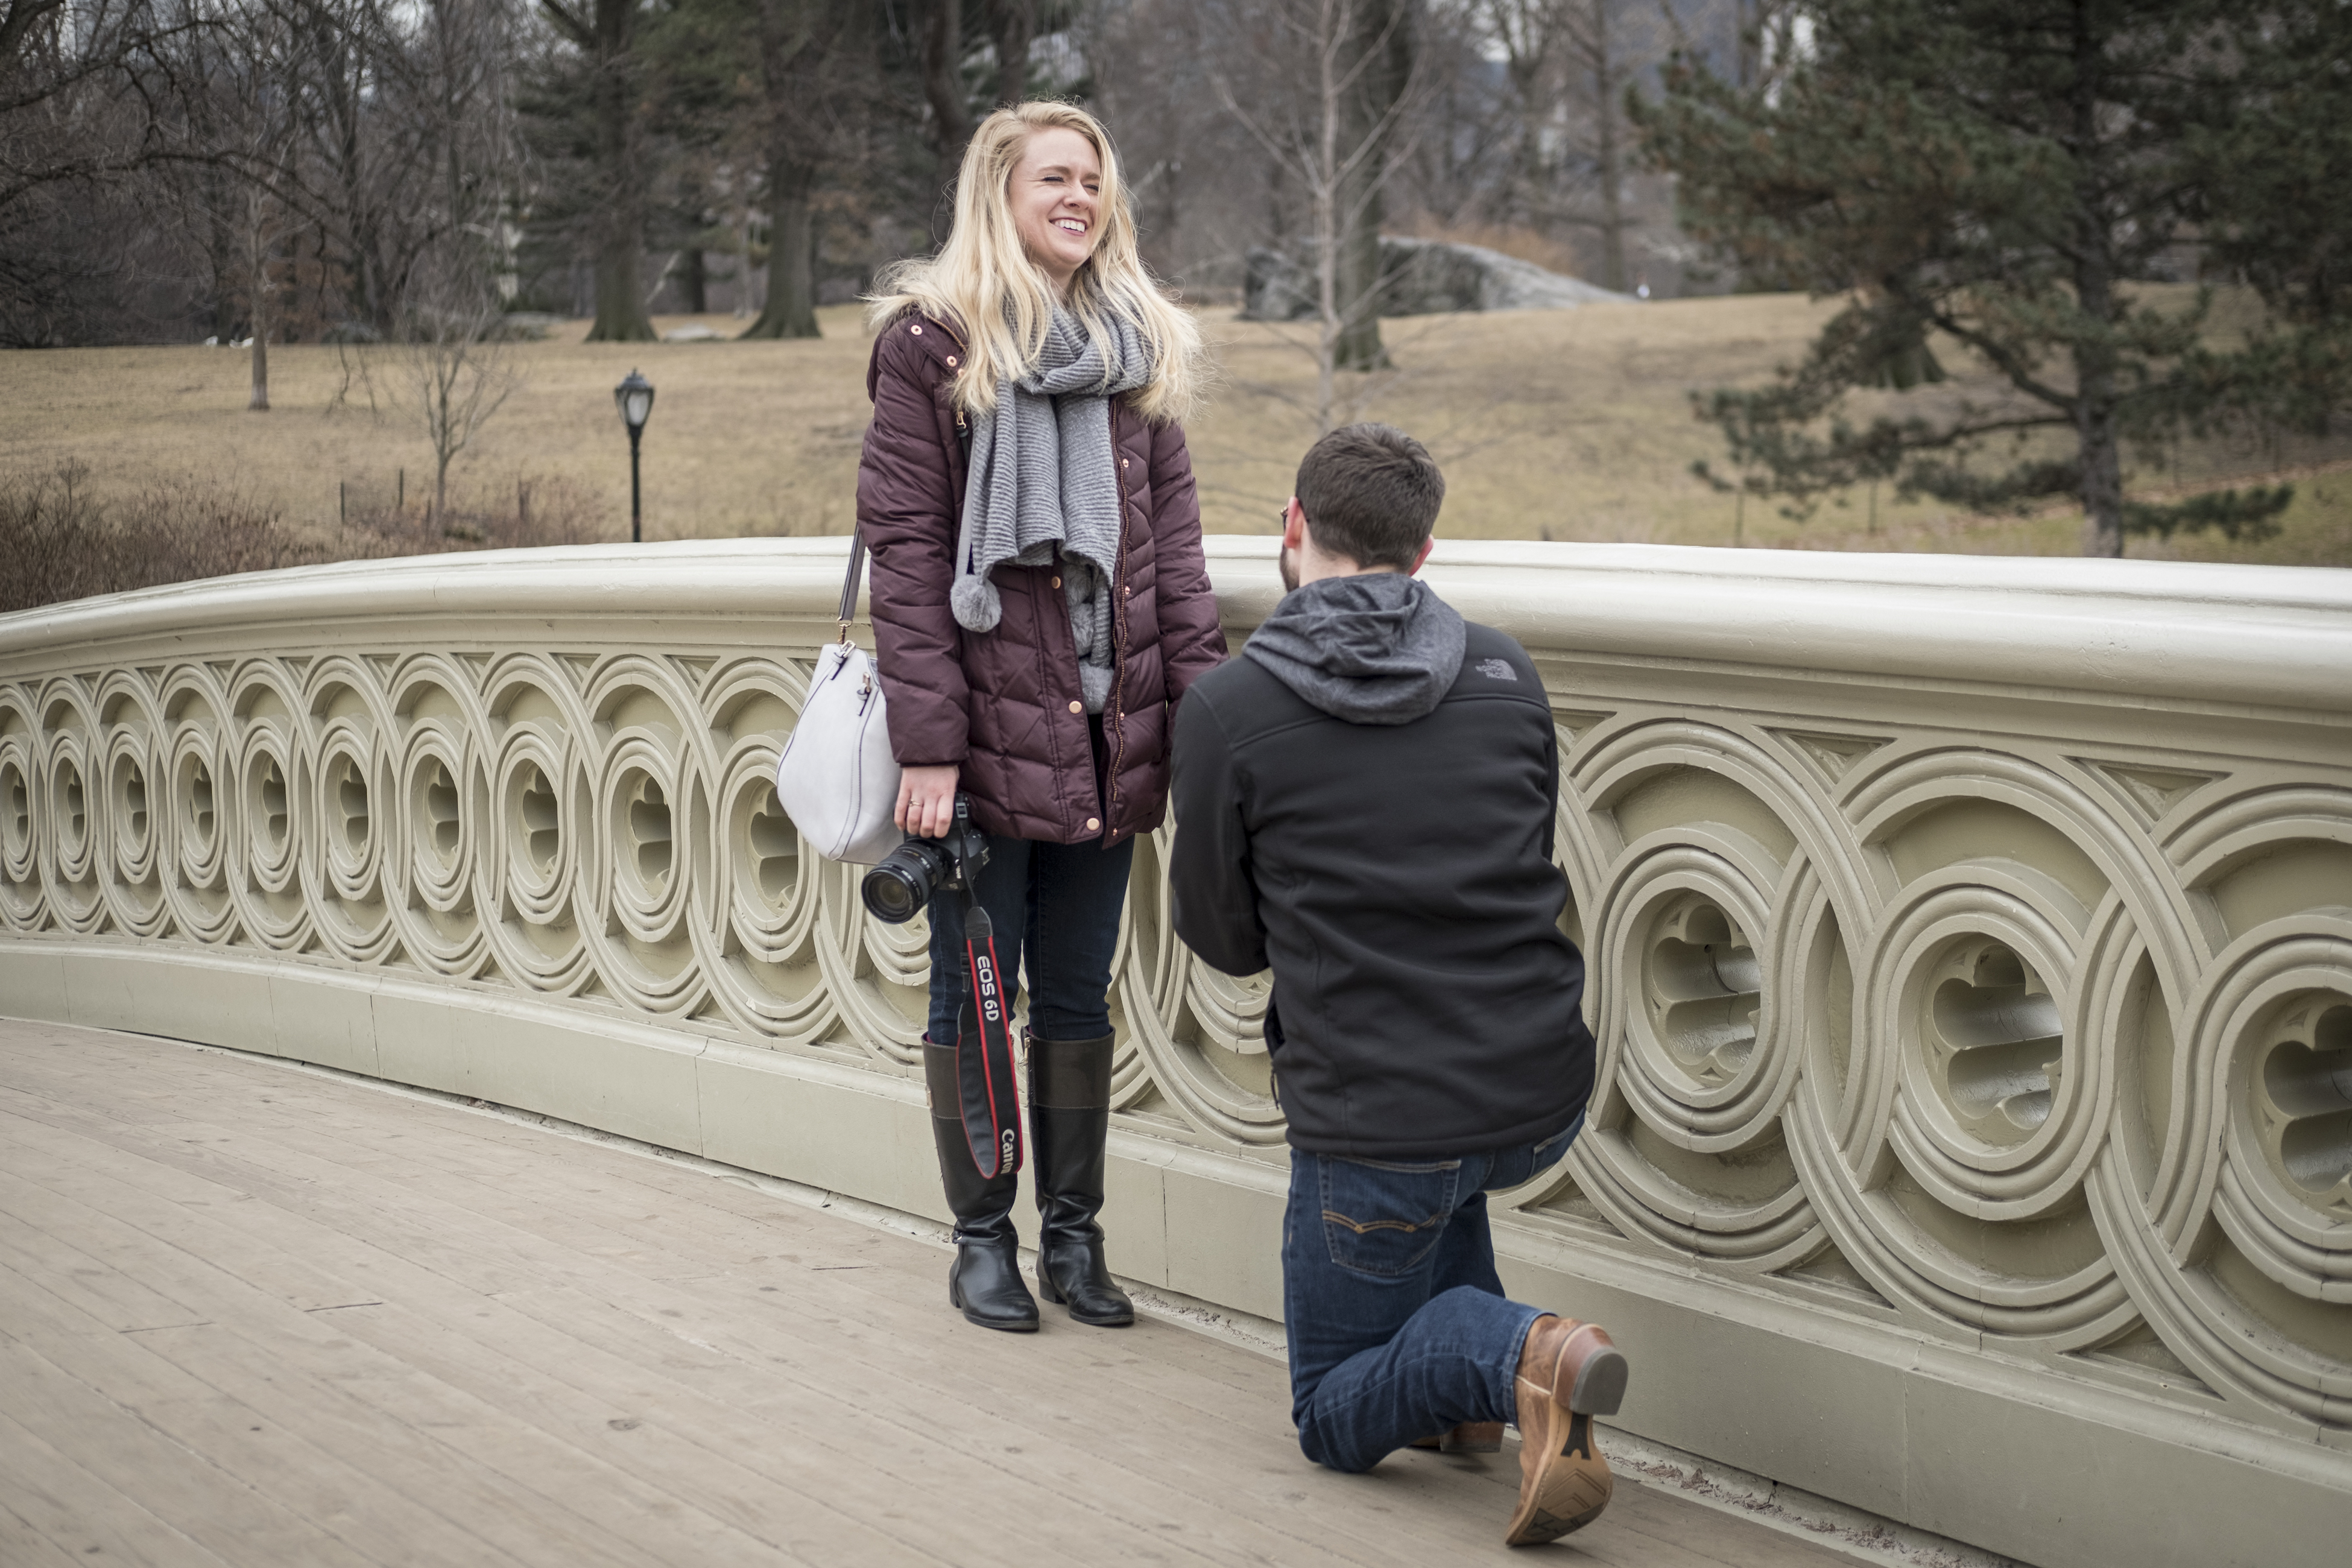 Photo Central Park Engagement Photography: Blake and Kelly